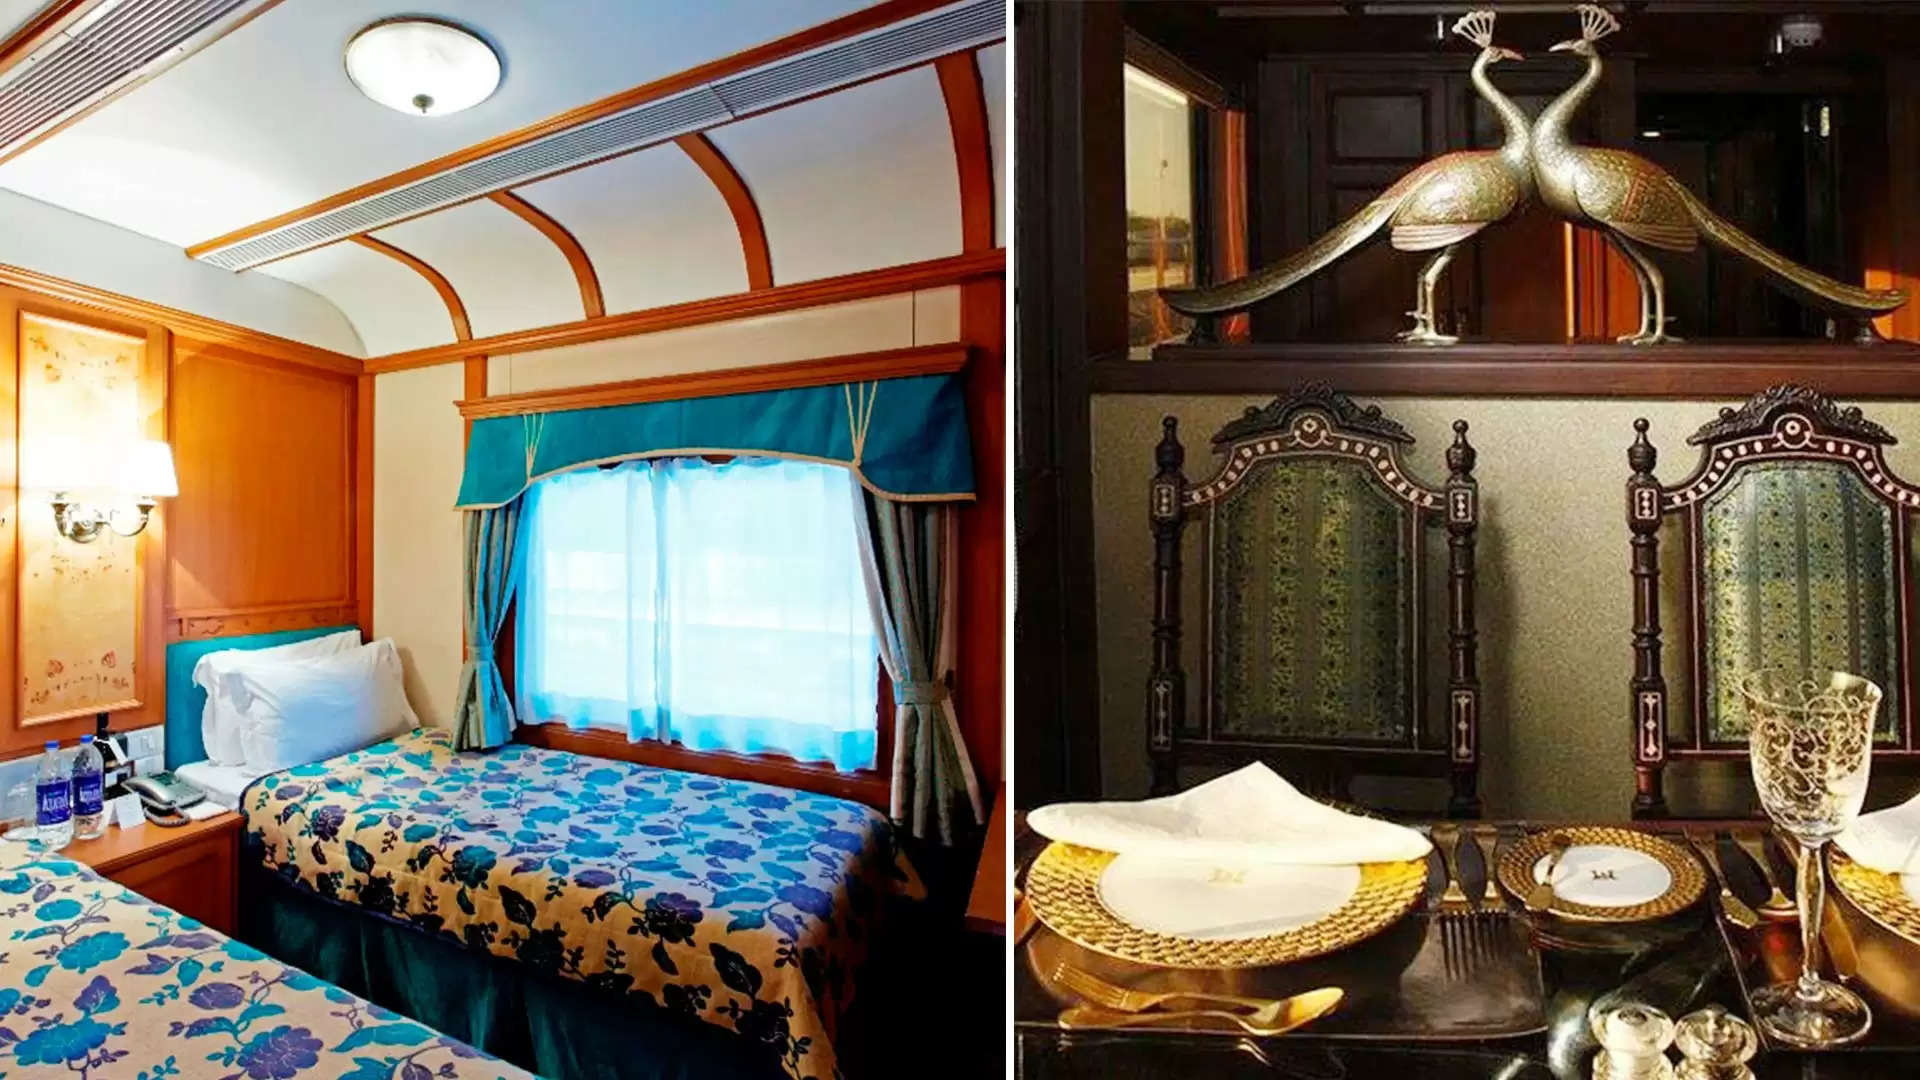 India's most expensive train